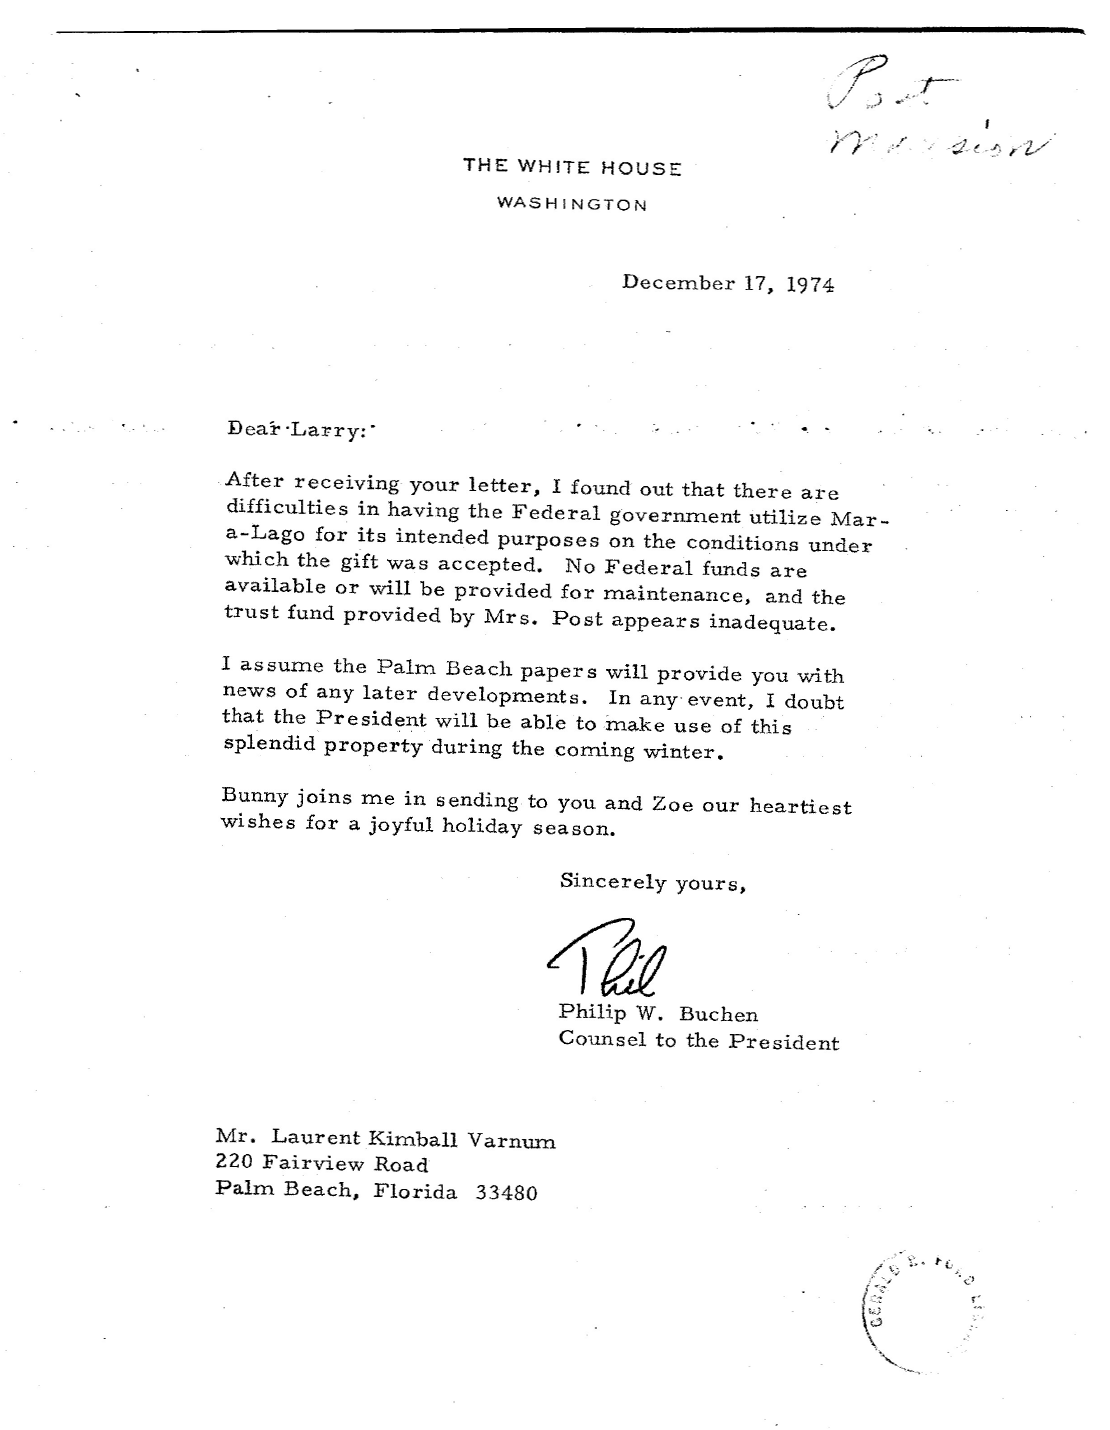 A letter dated Dec. 17, 1974 from the Ford administration saying the US government could not afford to keep Mar-a-Lago.